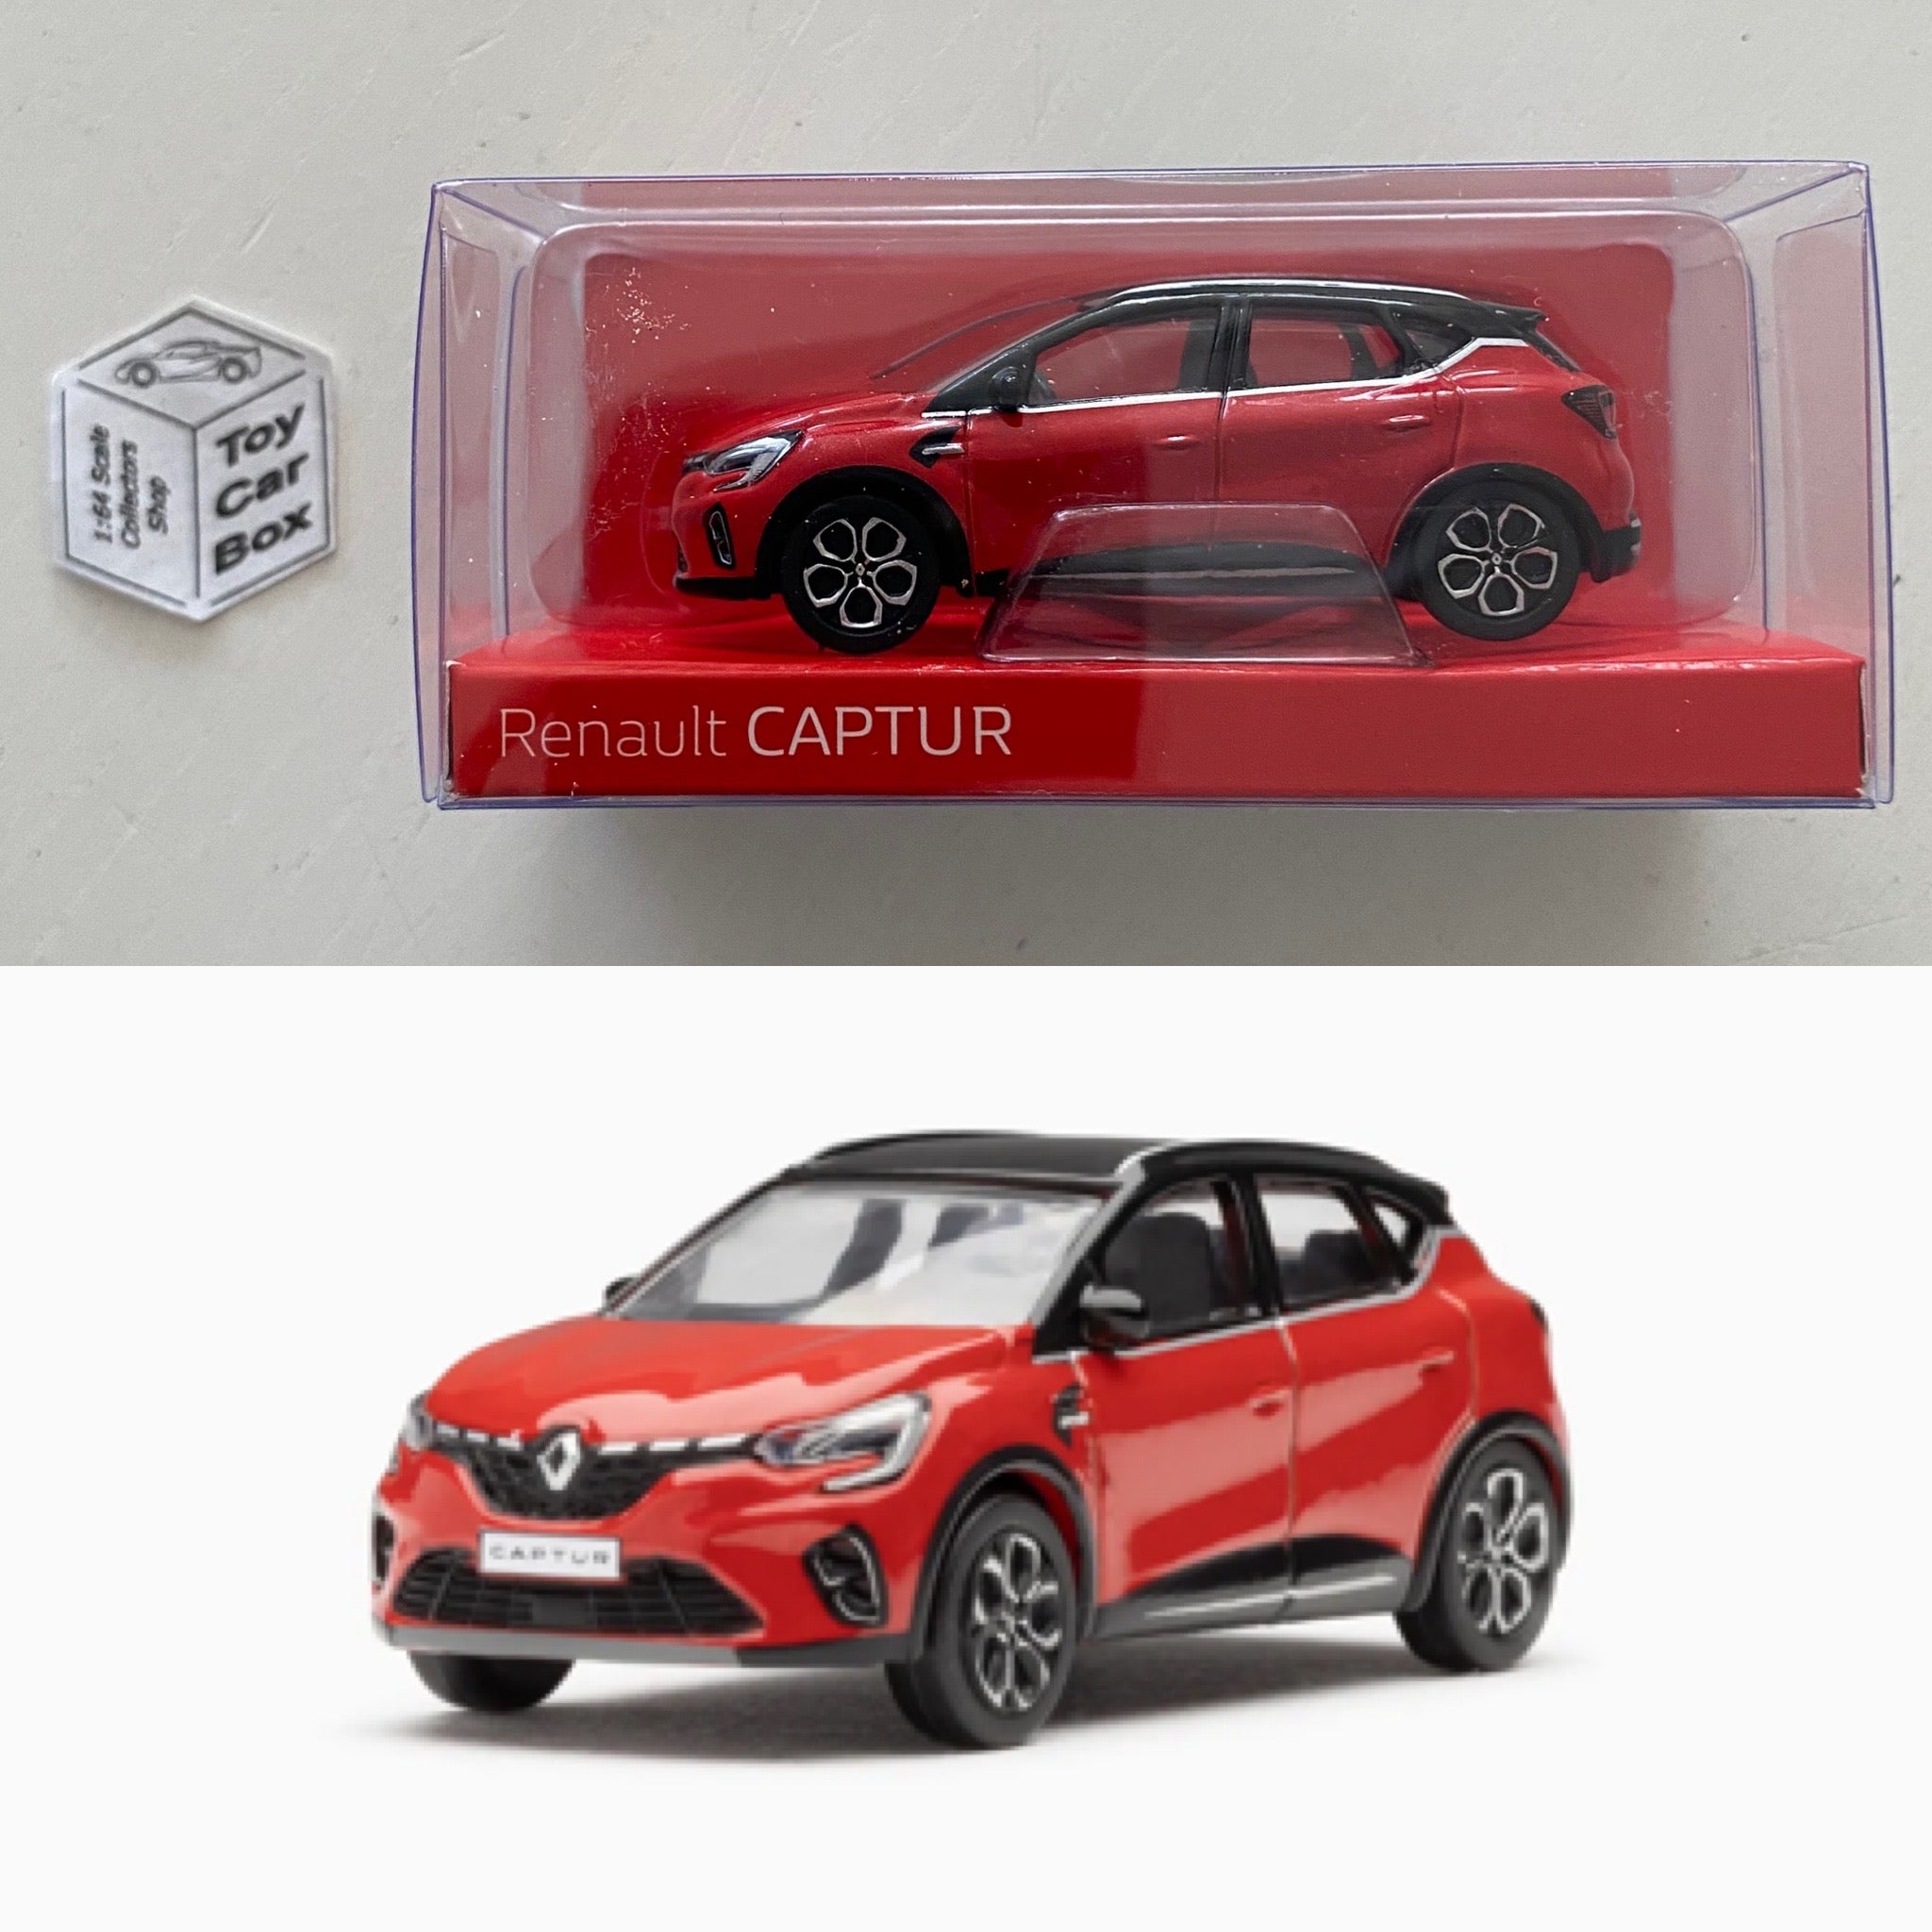 Z-MODELS 1:64 Scale - 2019 Renault Captur (Flame Red - Boxed) I06g